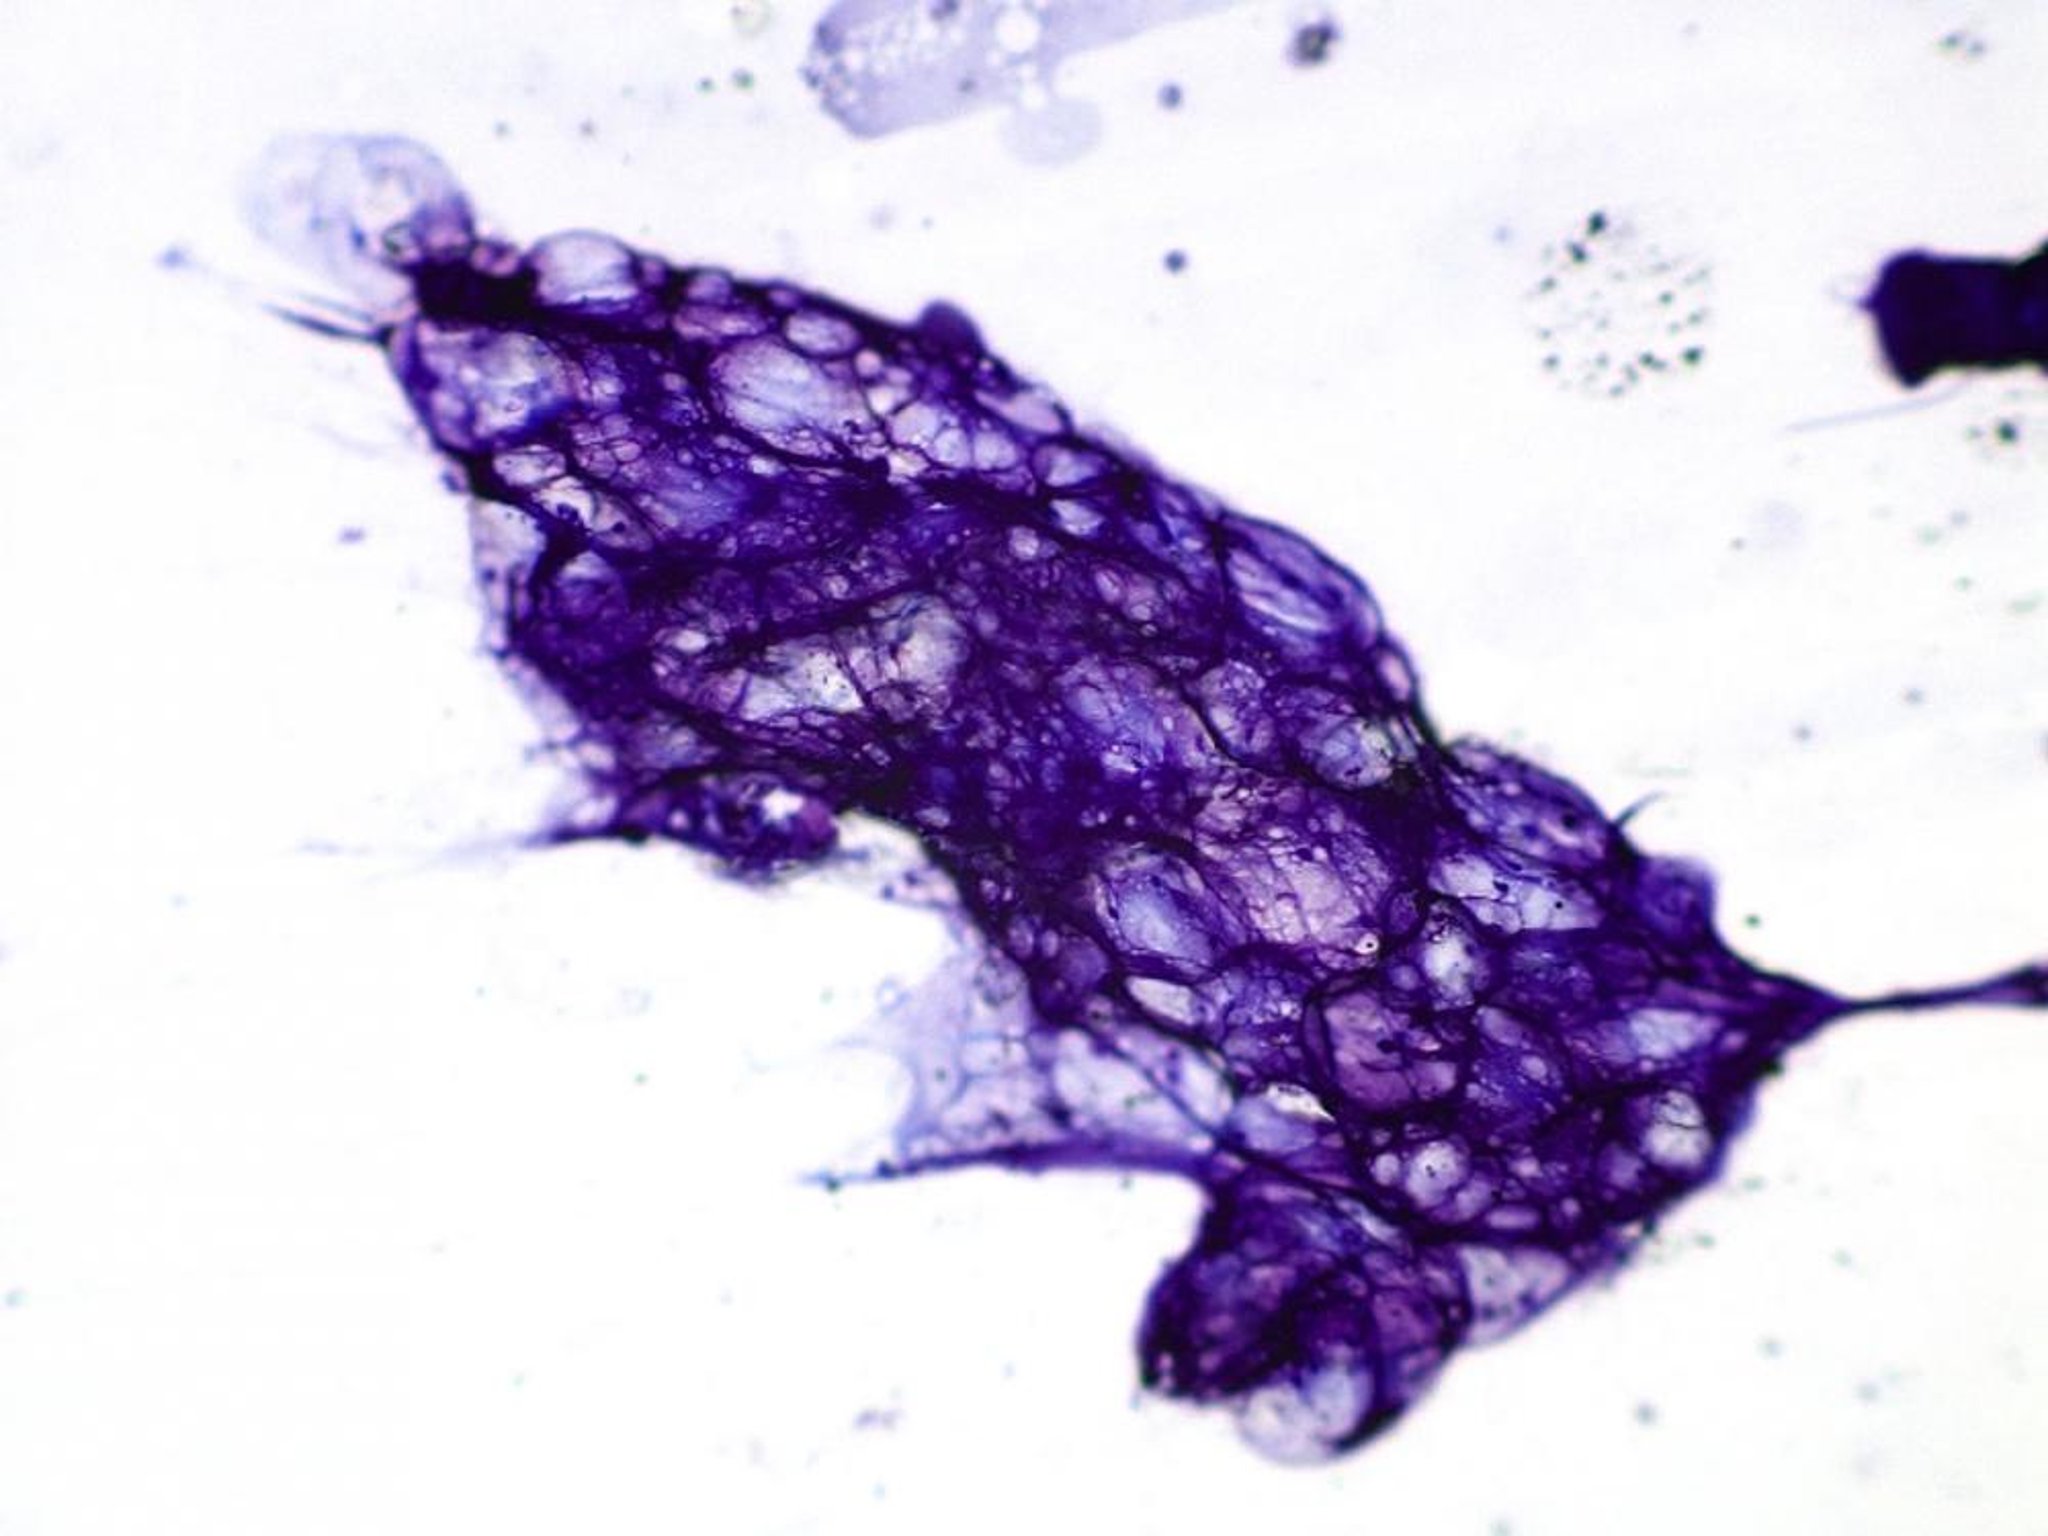 Fat cells, folded and overlapping, cytology